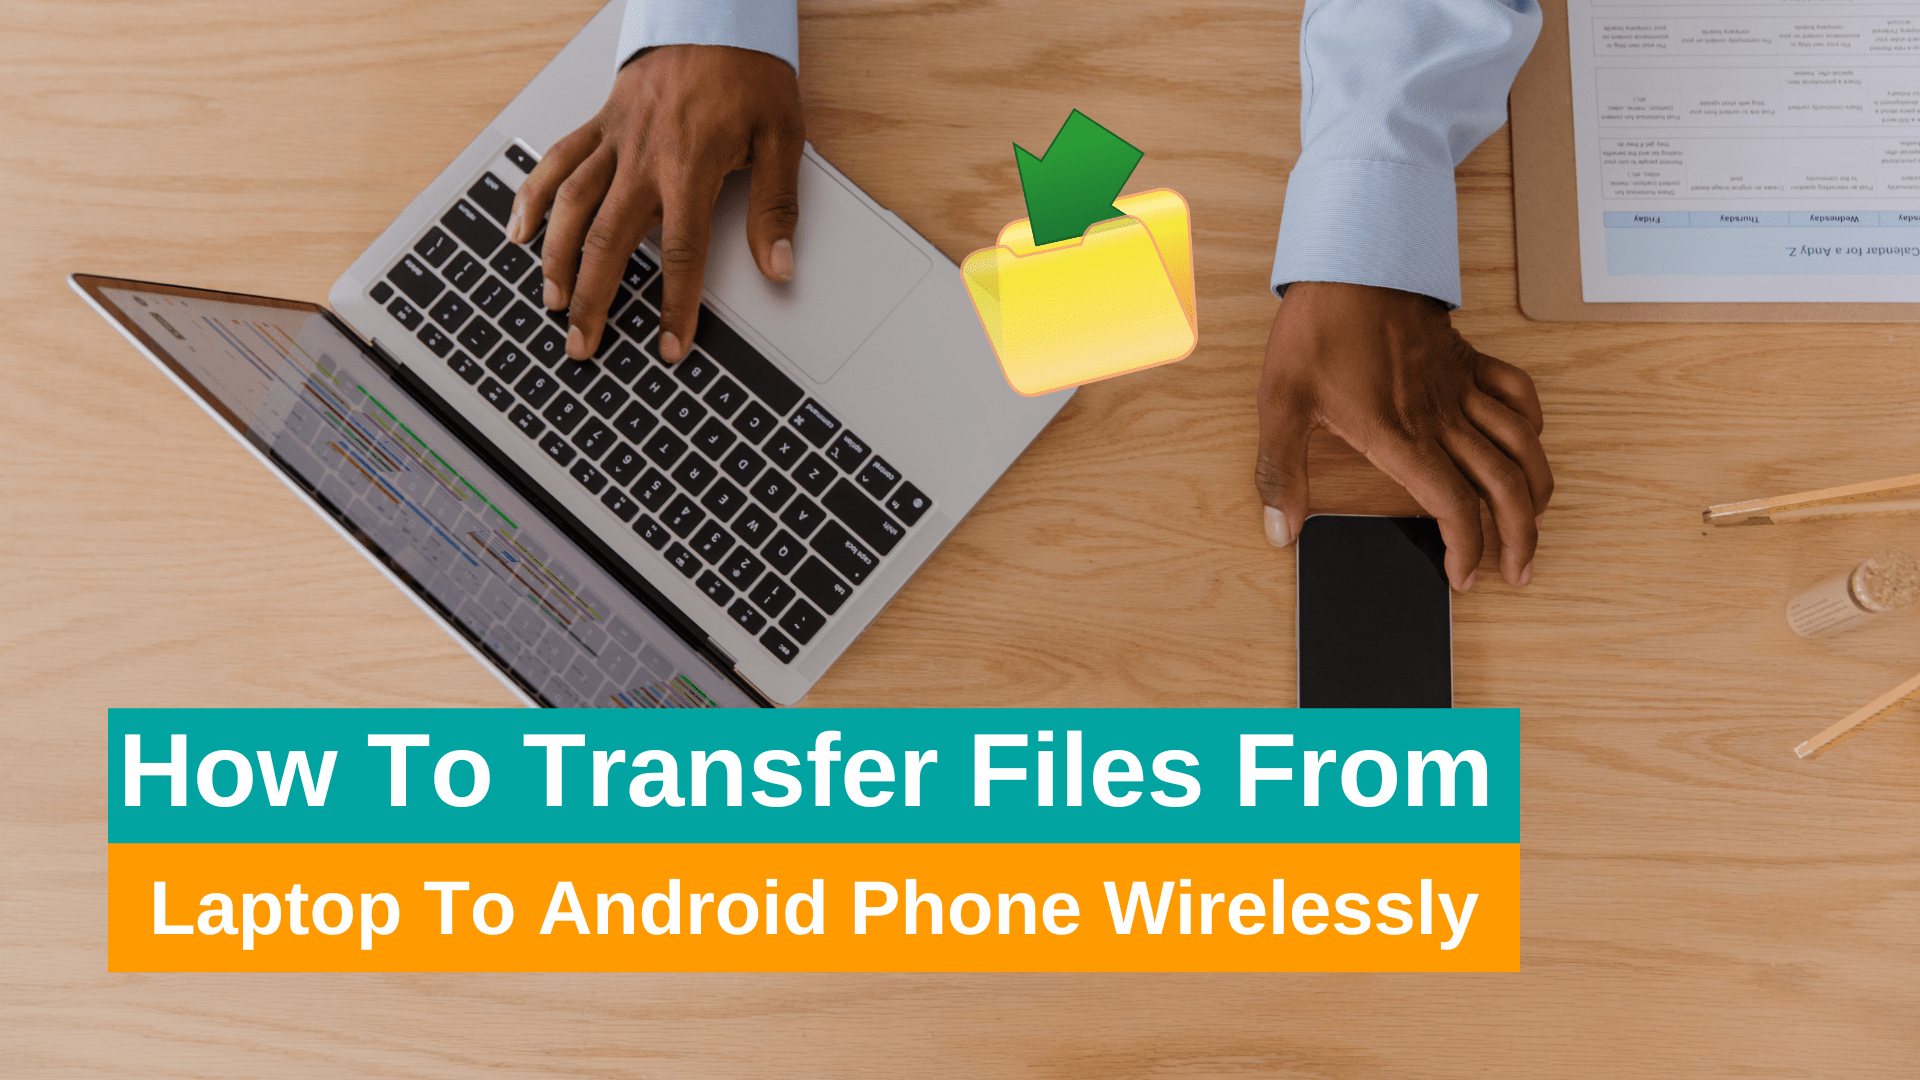 How To Transfer Files From Laptop To Android Phone Wirelessly